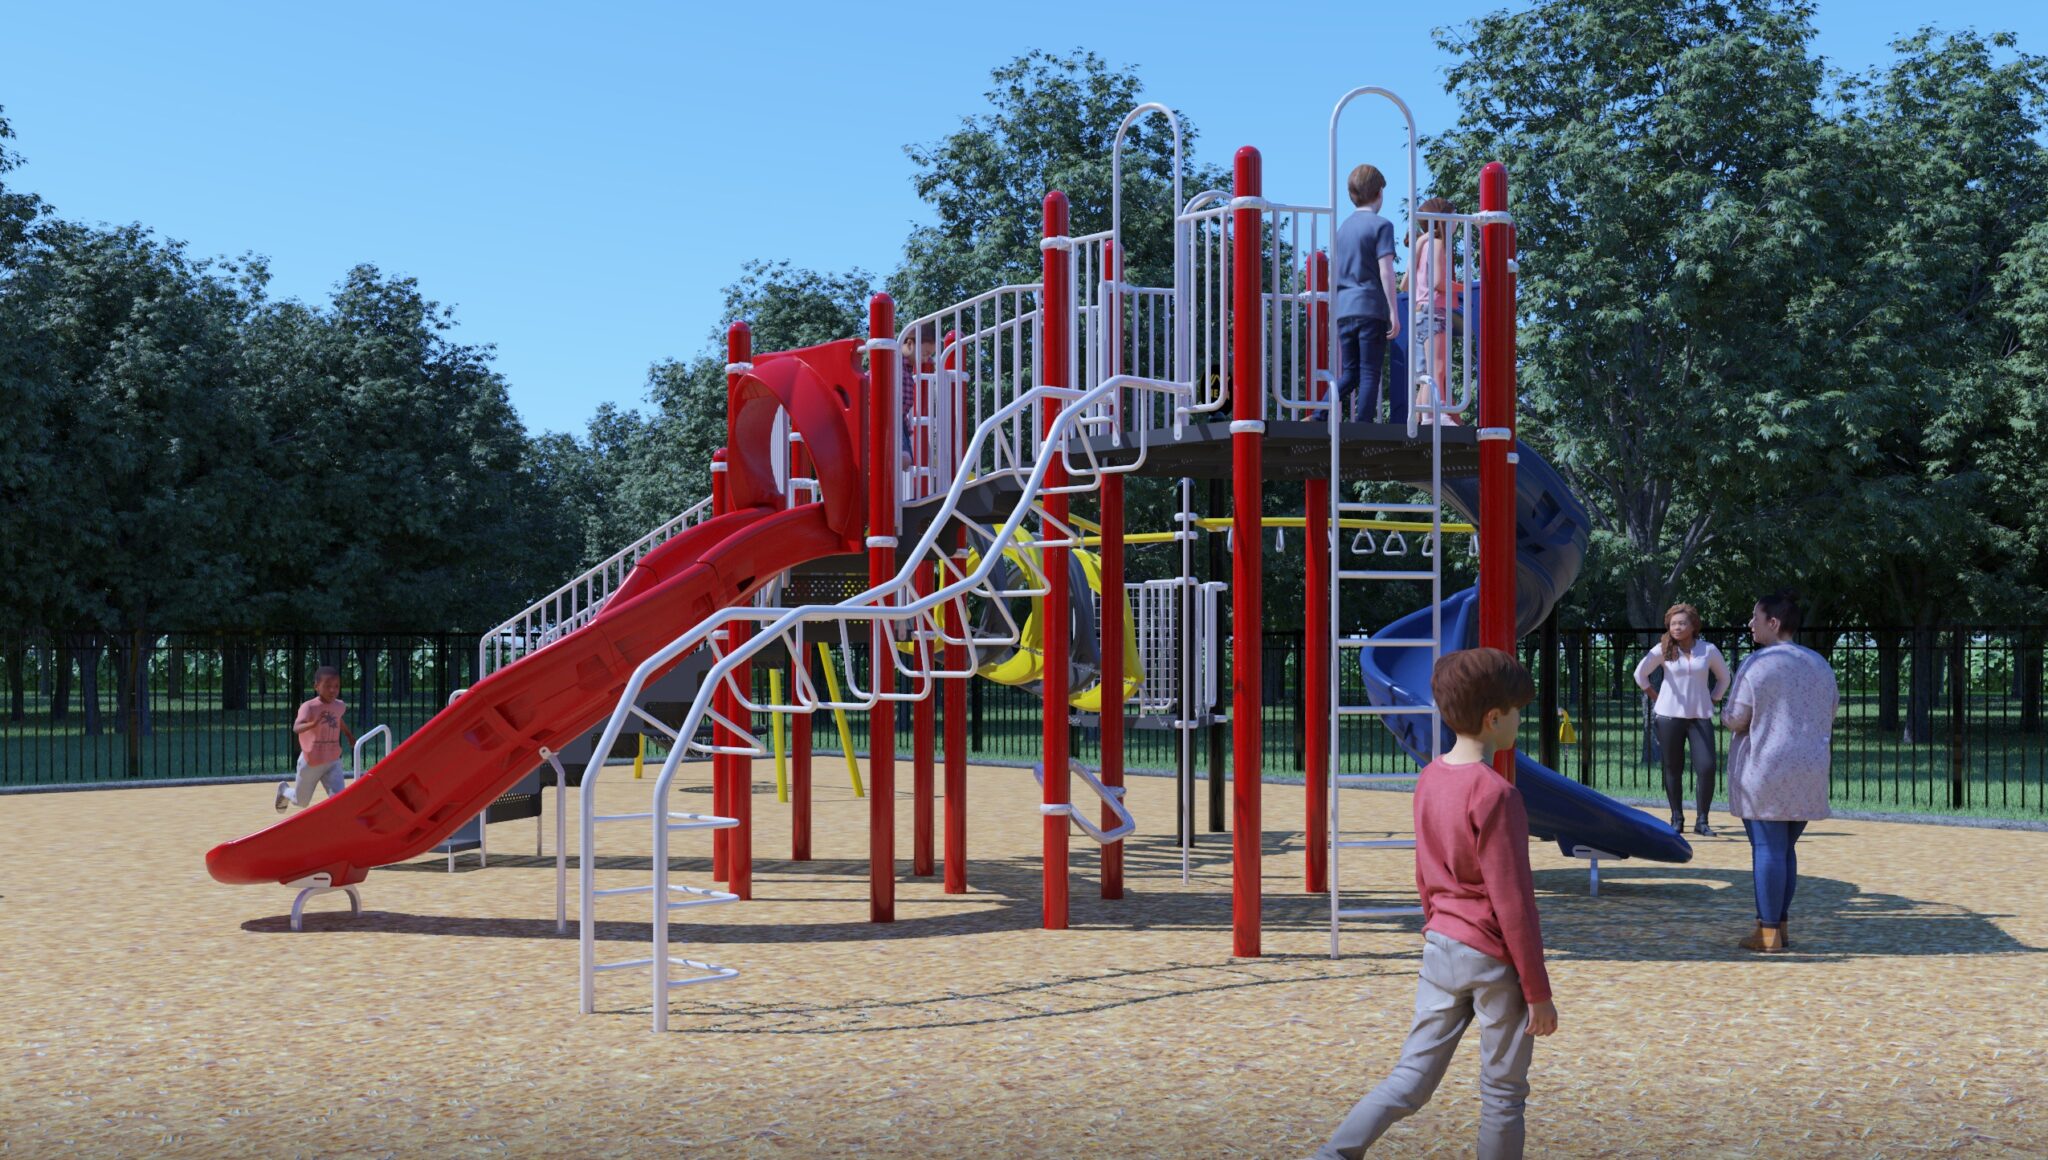 An artist's rendition of the Boys and Girls Club playground, including a long red slide and a white climbing ladder.